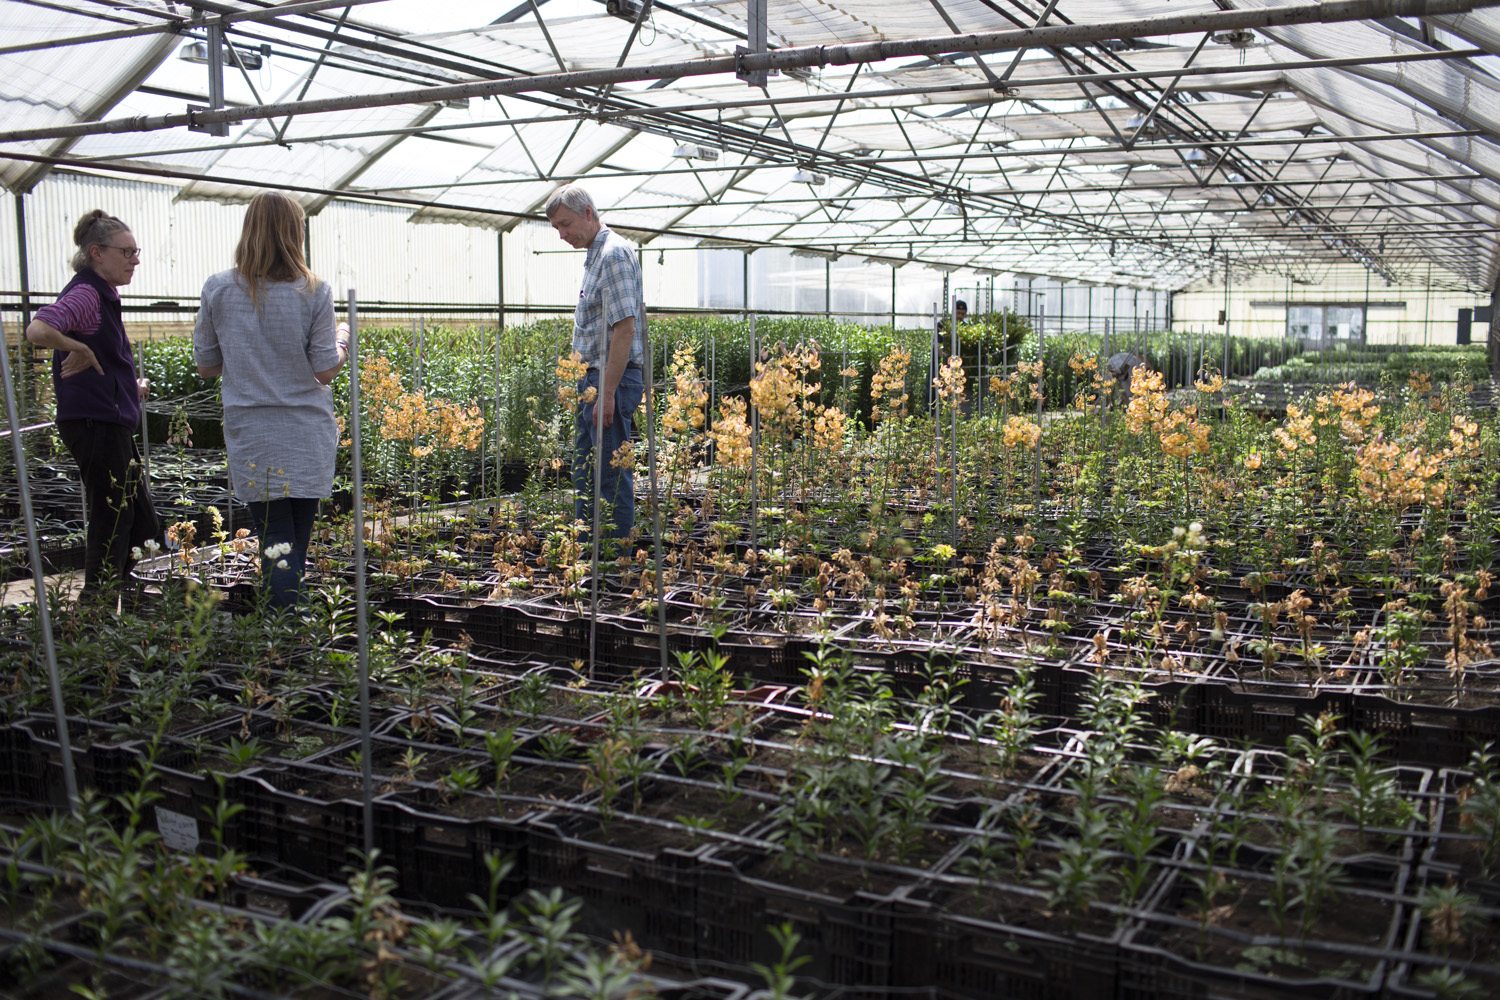 Three people in a greenhouse with crates of flowers